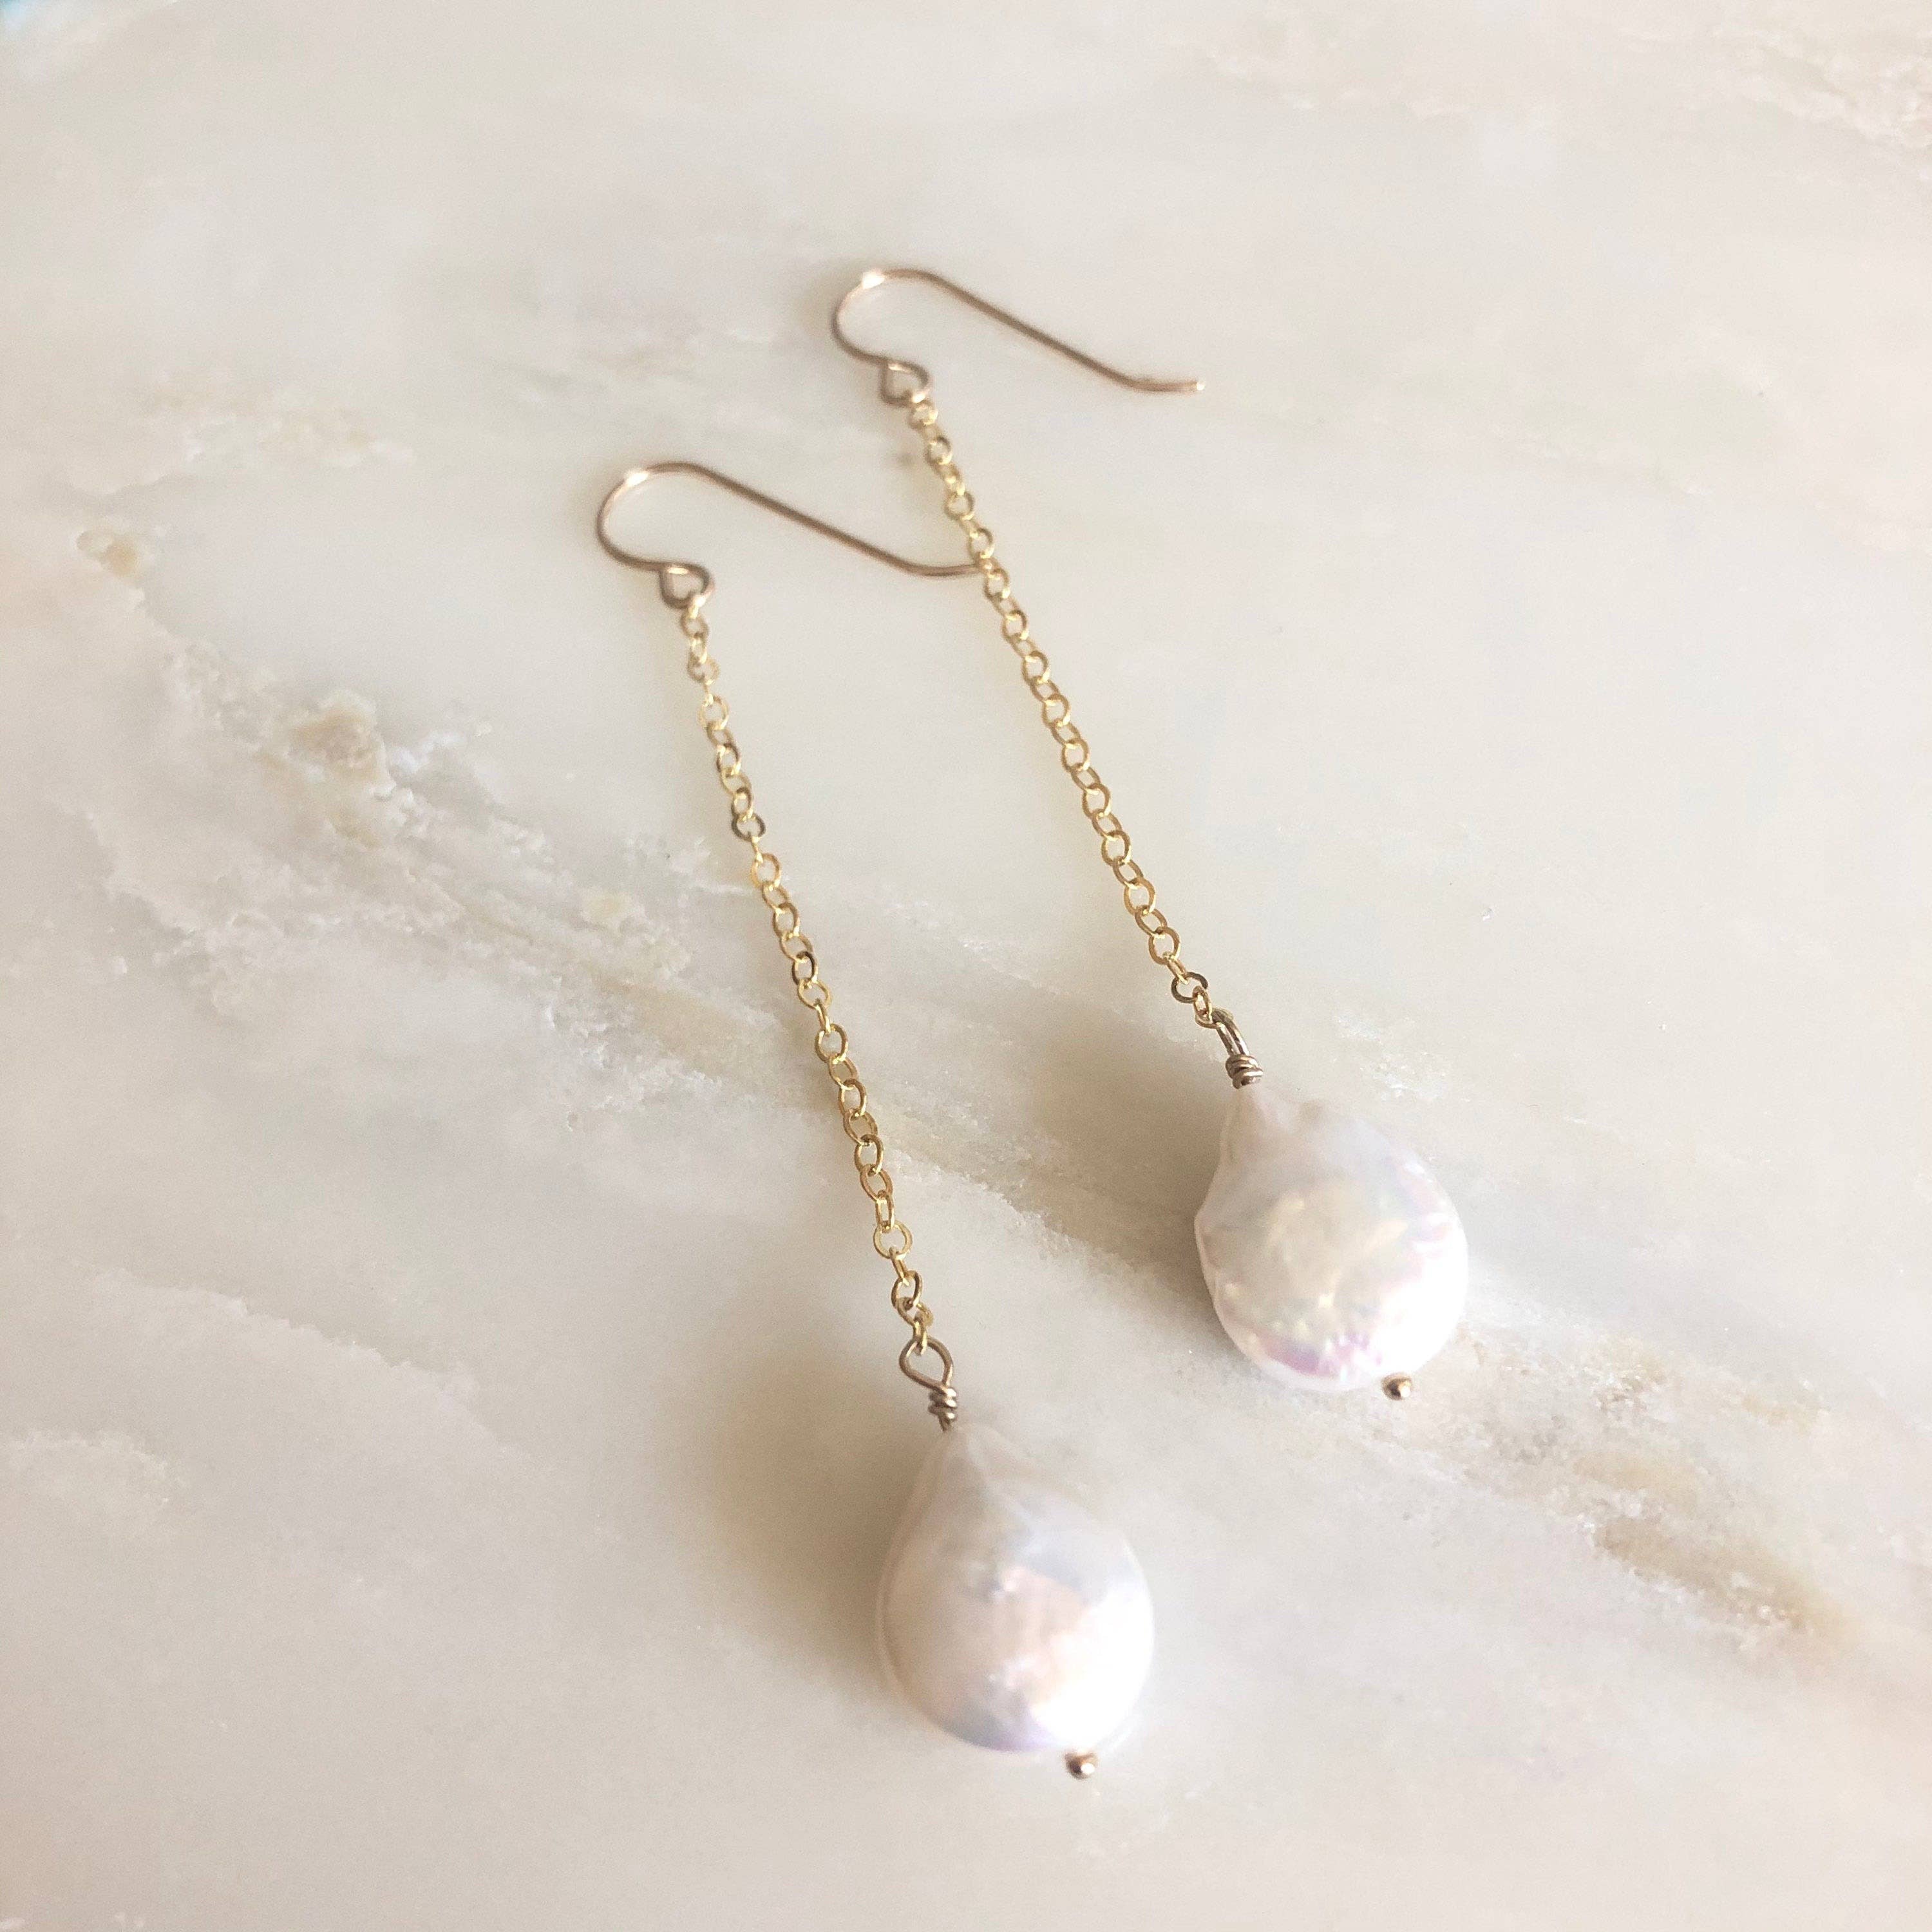 chain earrings with pearls